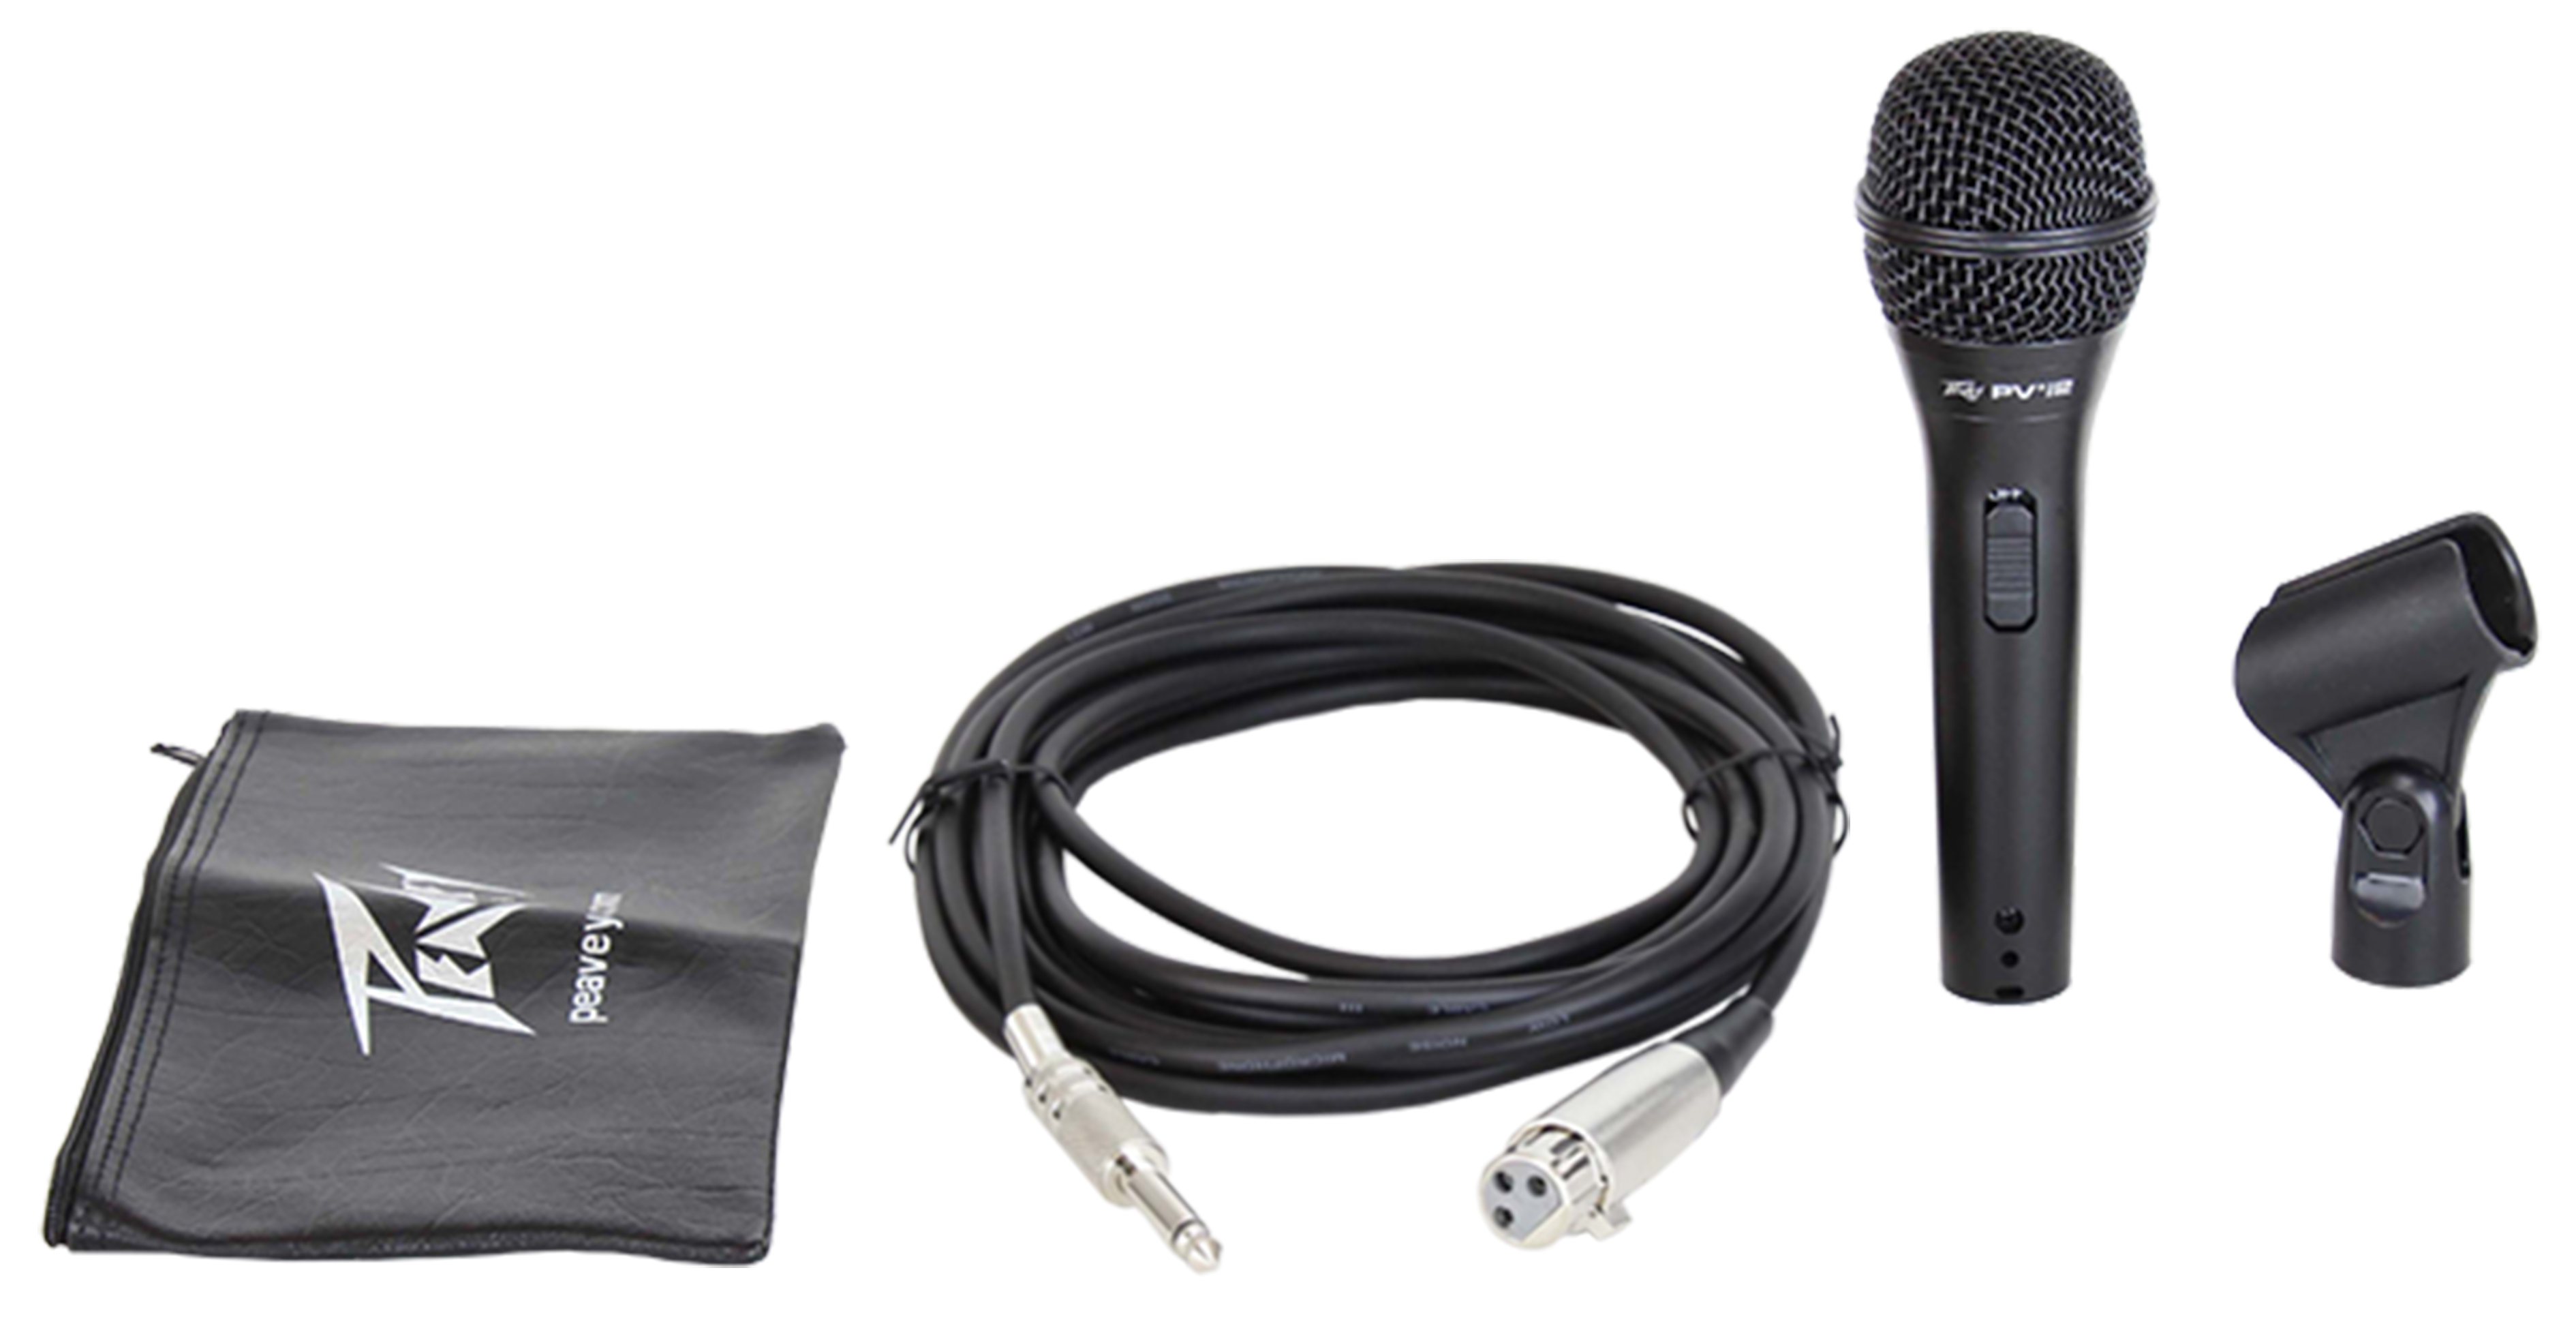 Peavey PVi 2 1/4 Gold Cardioid Unidirectional Dynamic Vocal Microphone with 1/4 inch Cable 